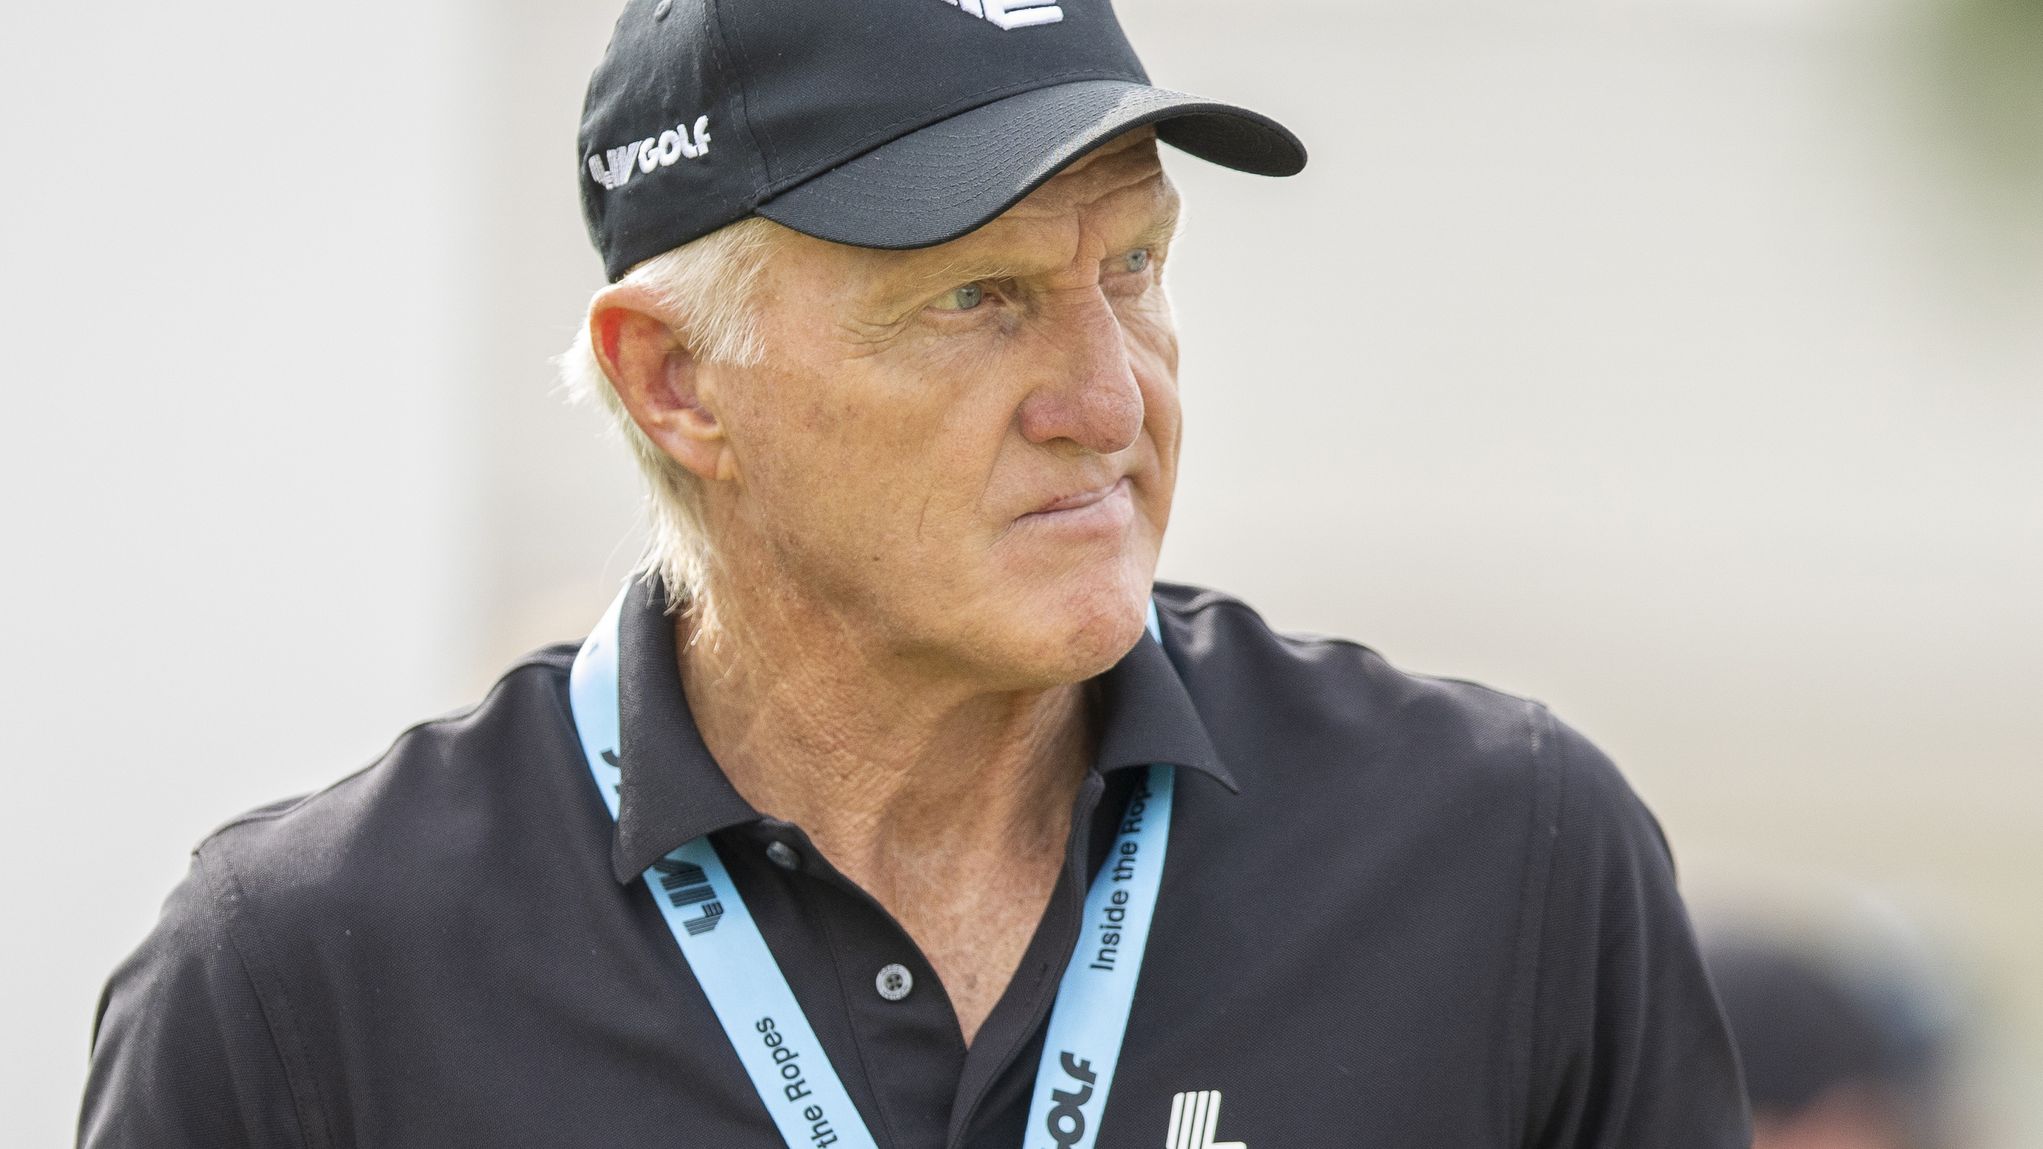 Greg Norman, CEO of LIV Golf, at the LIV Golf Invitational in Bangkok. (Photo by Peter Van der Klooster/Getty Images)